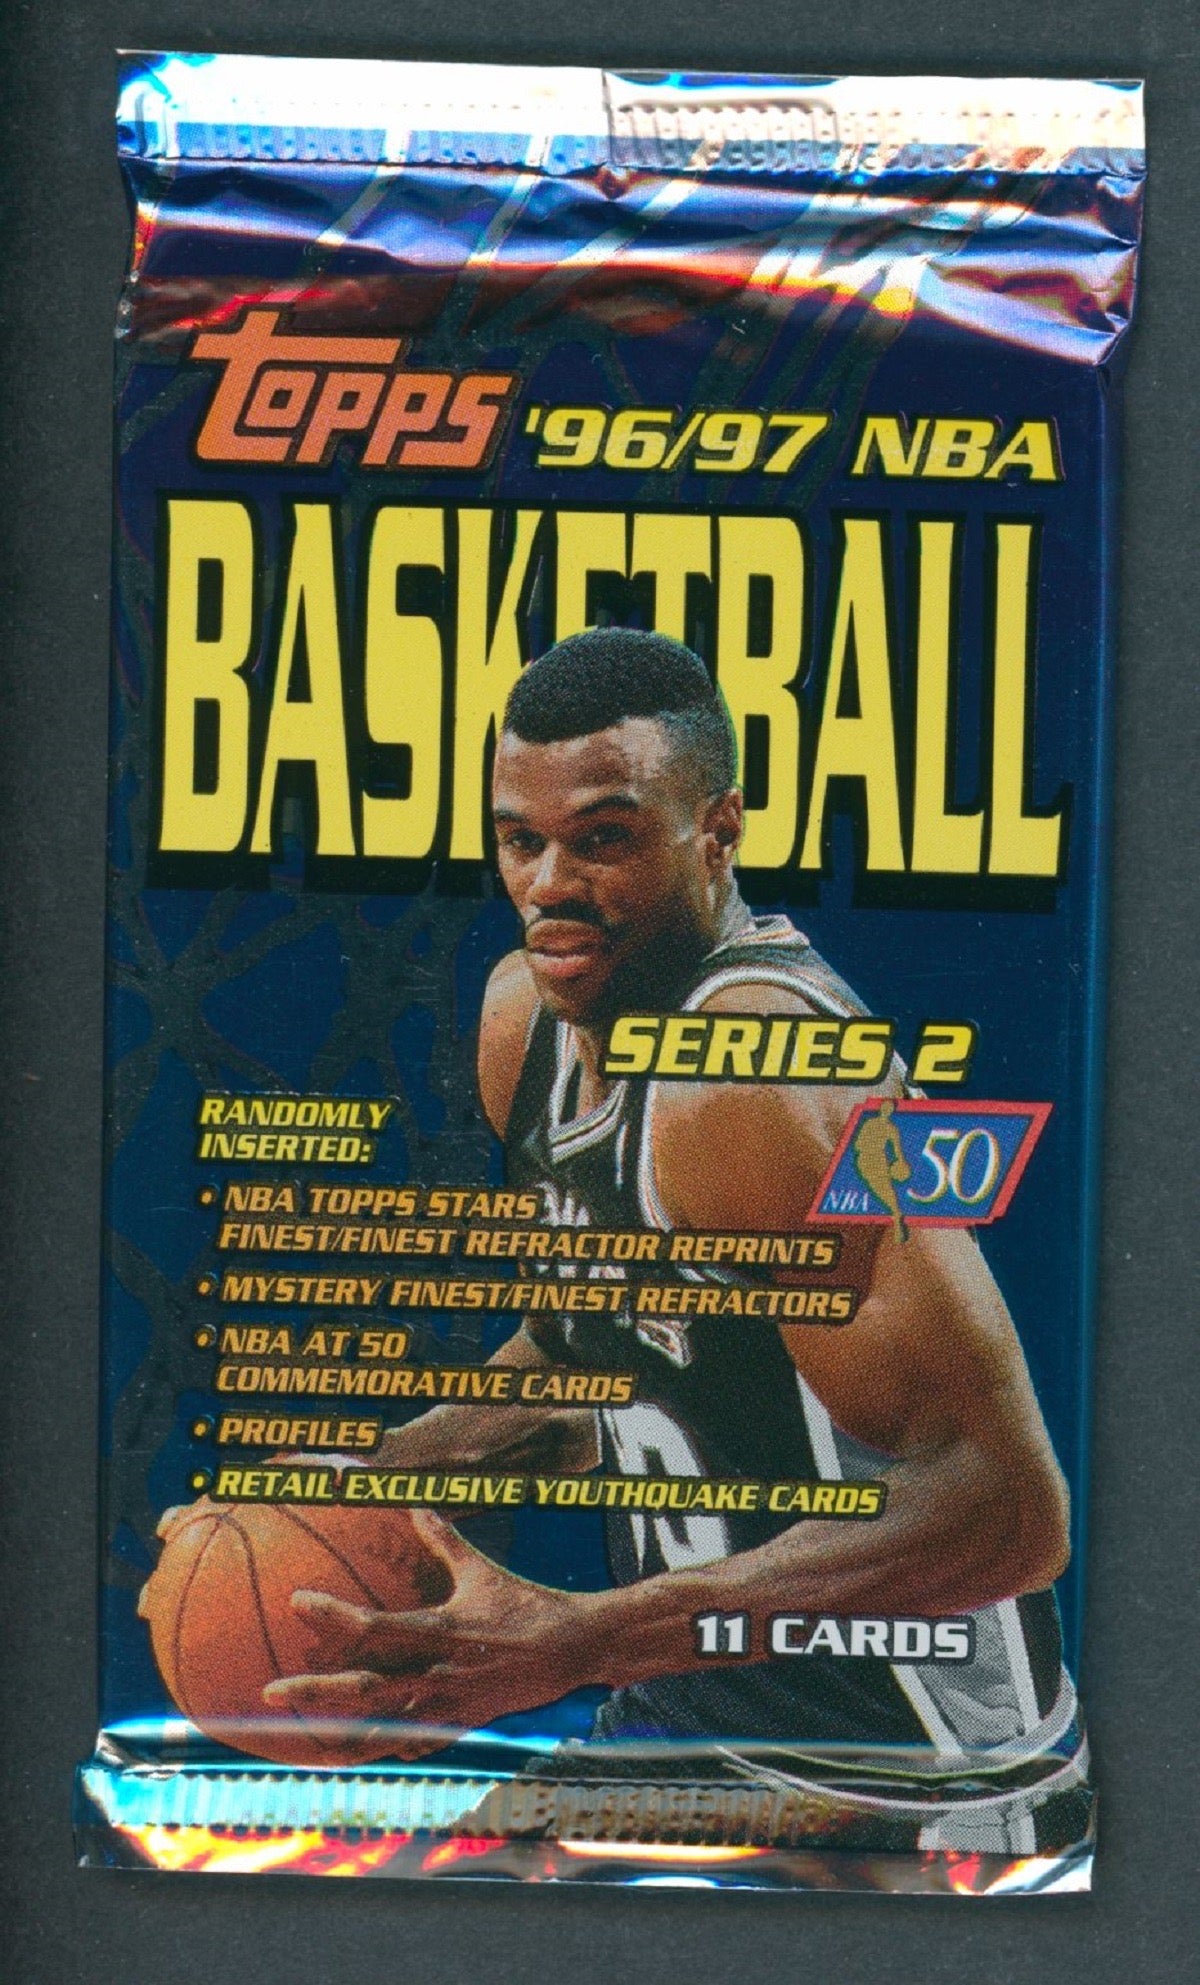 1996/97 Topps Basketball Unopened Series 2 Pack (Retail)